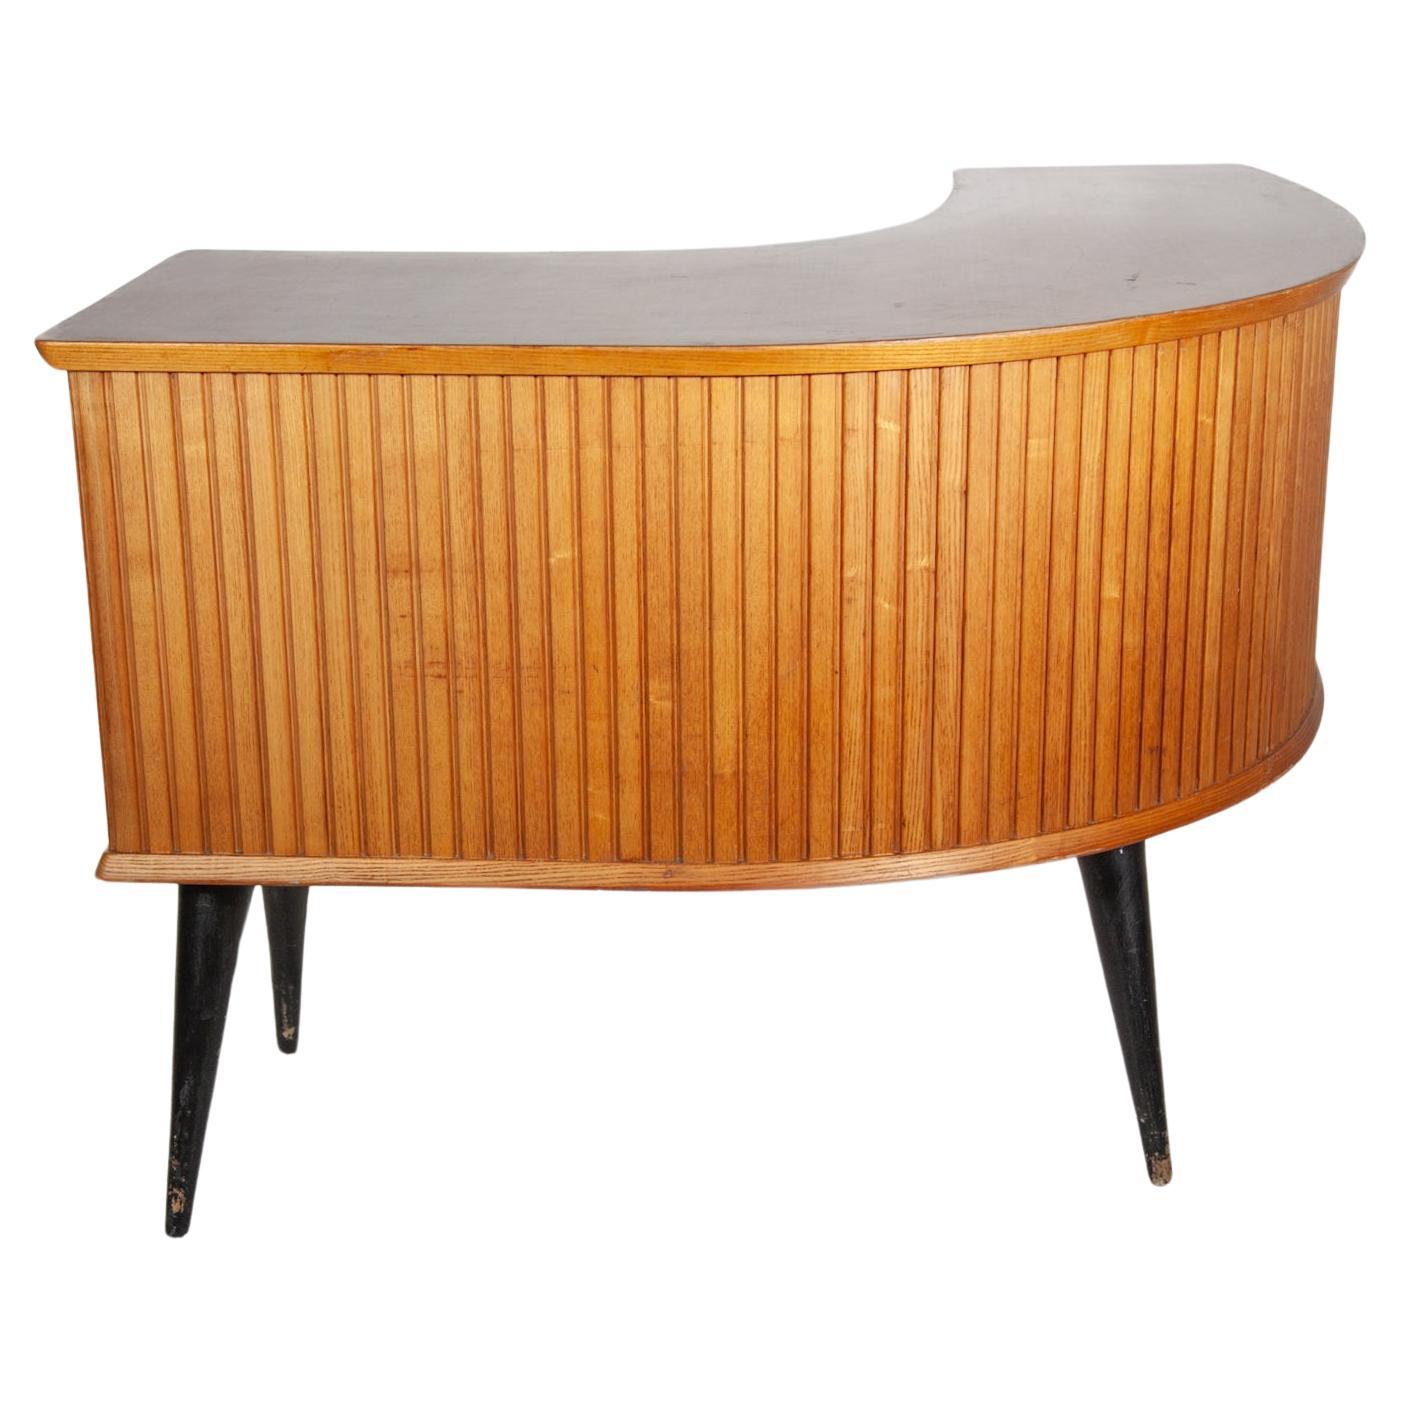 Custom made handcrafted shop counter or desk in a boomerang line with vertical slats at the front which emphasizes the curve of the arch even more, on the inside one side with 3 sliders and metal grip at the other side one door with grip in the